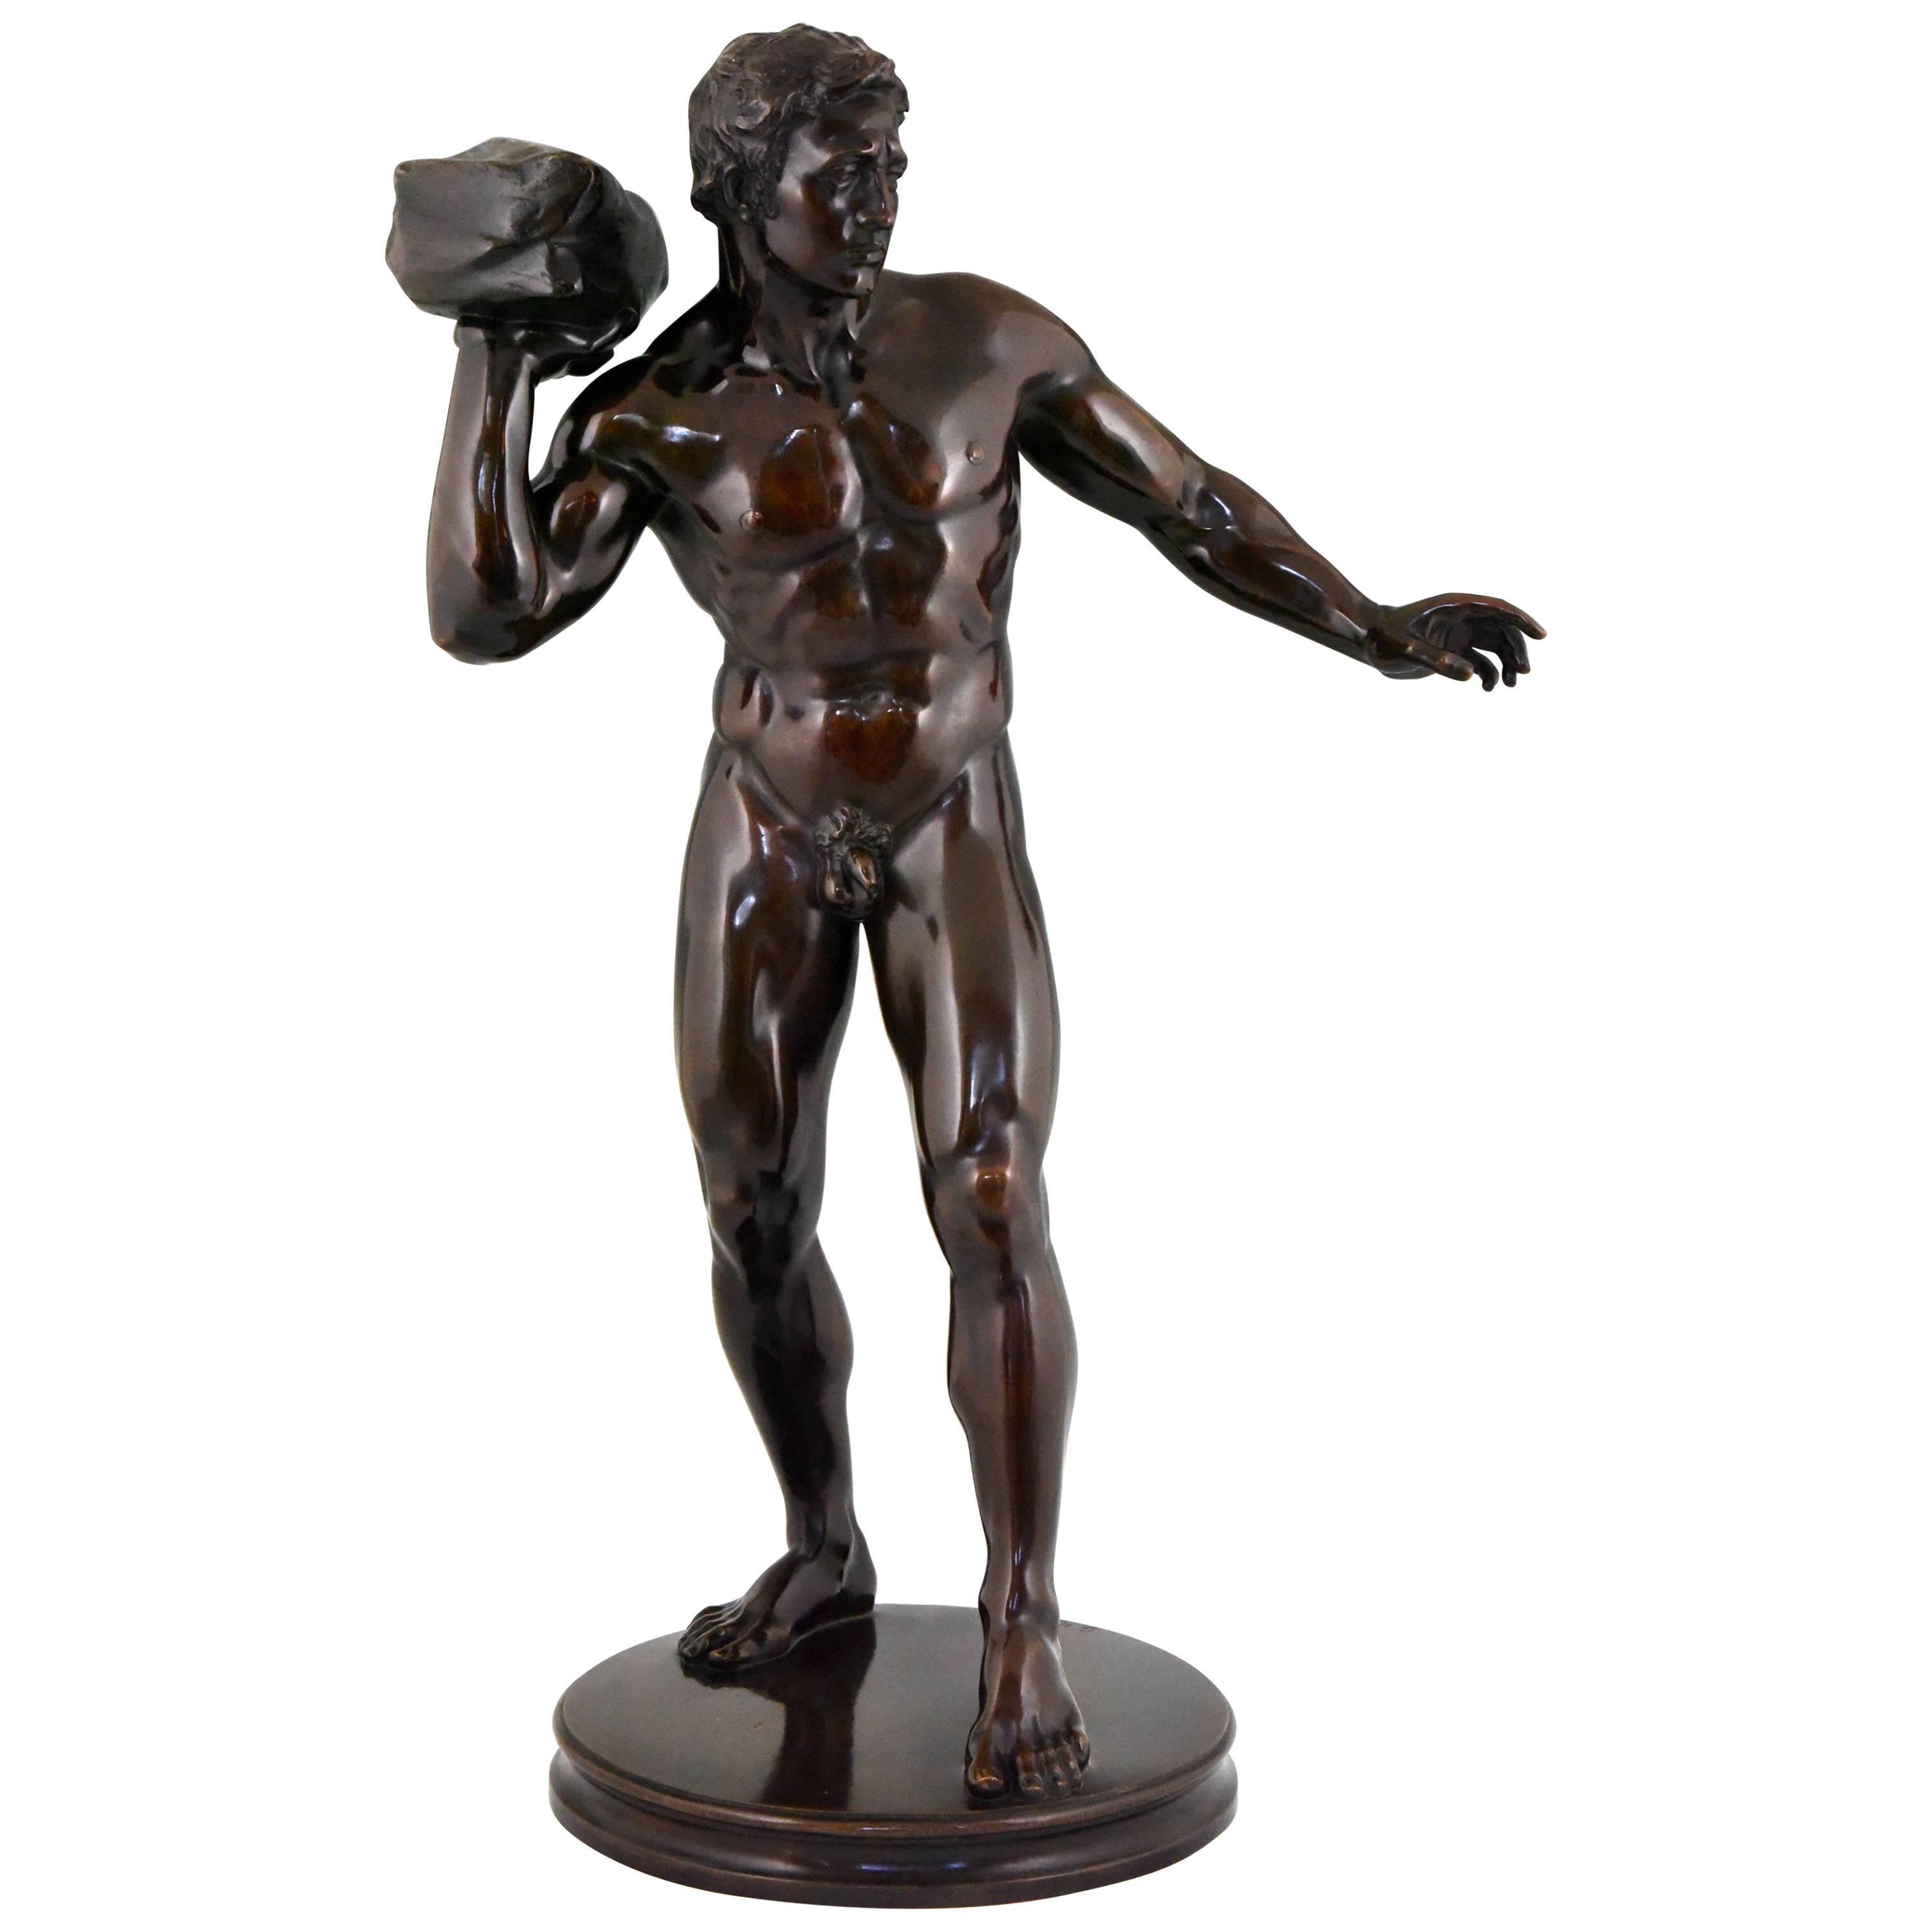 Antique Sculpture of a Male Nude Athlete Georg Kemper H. 34 inch Germany, 1900